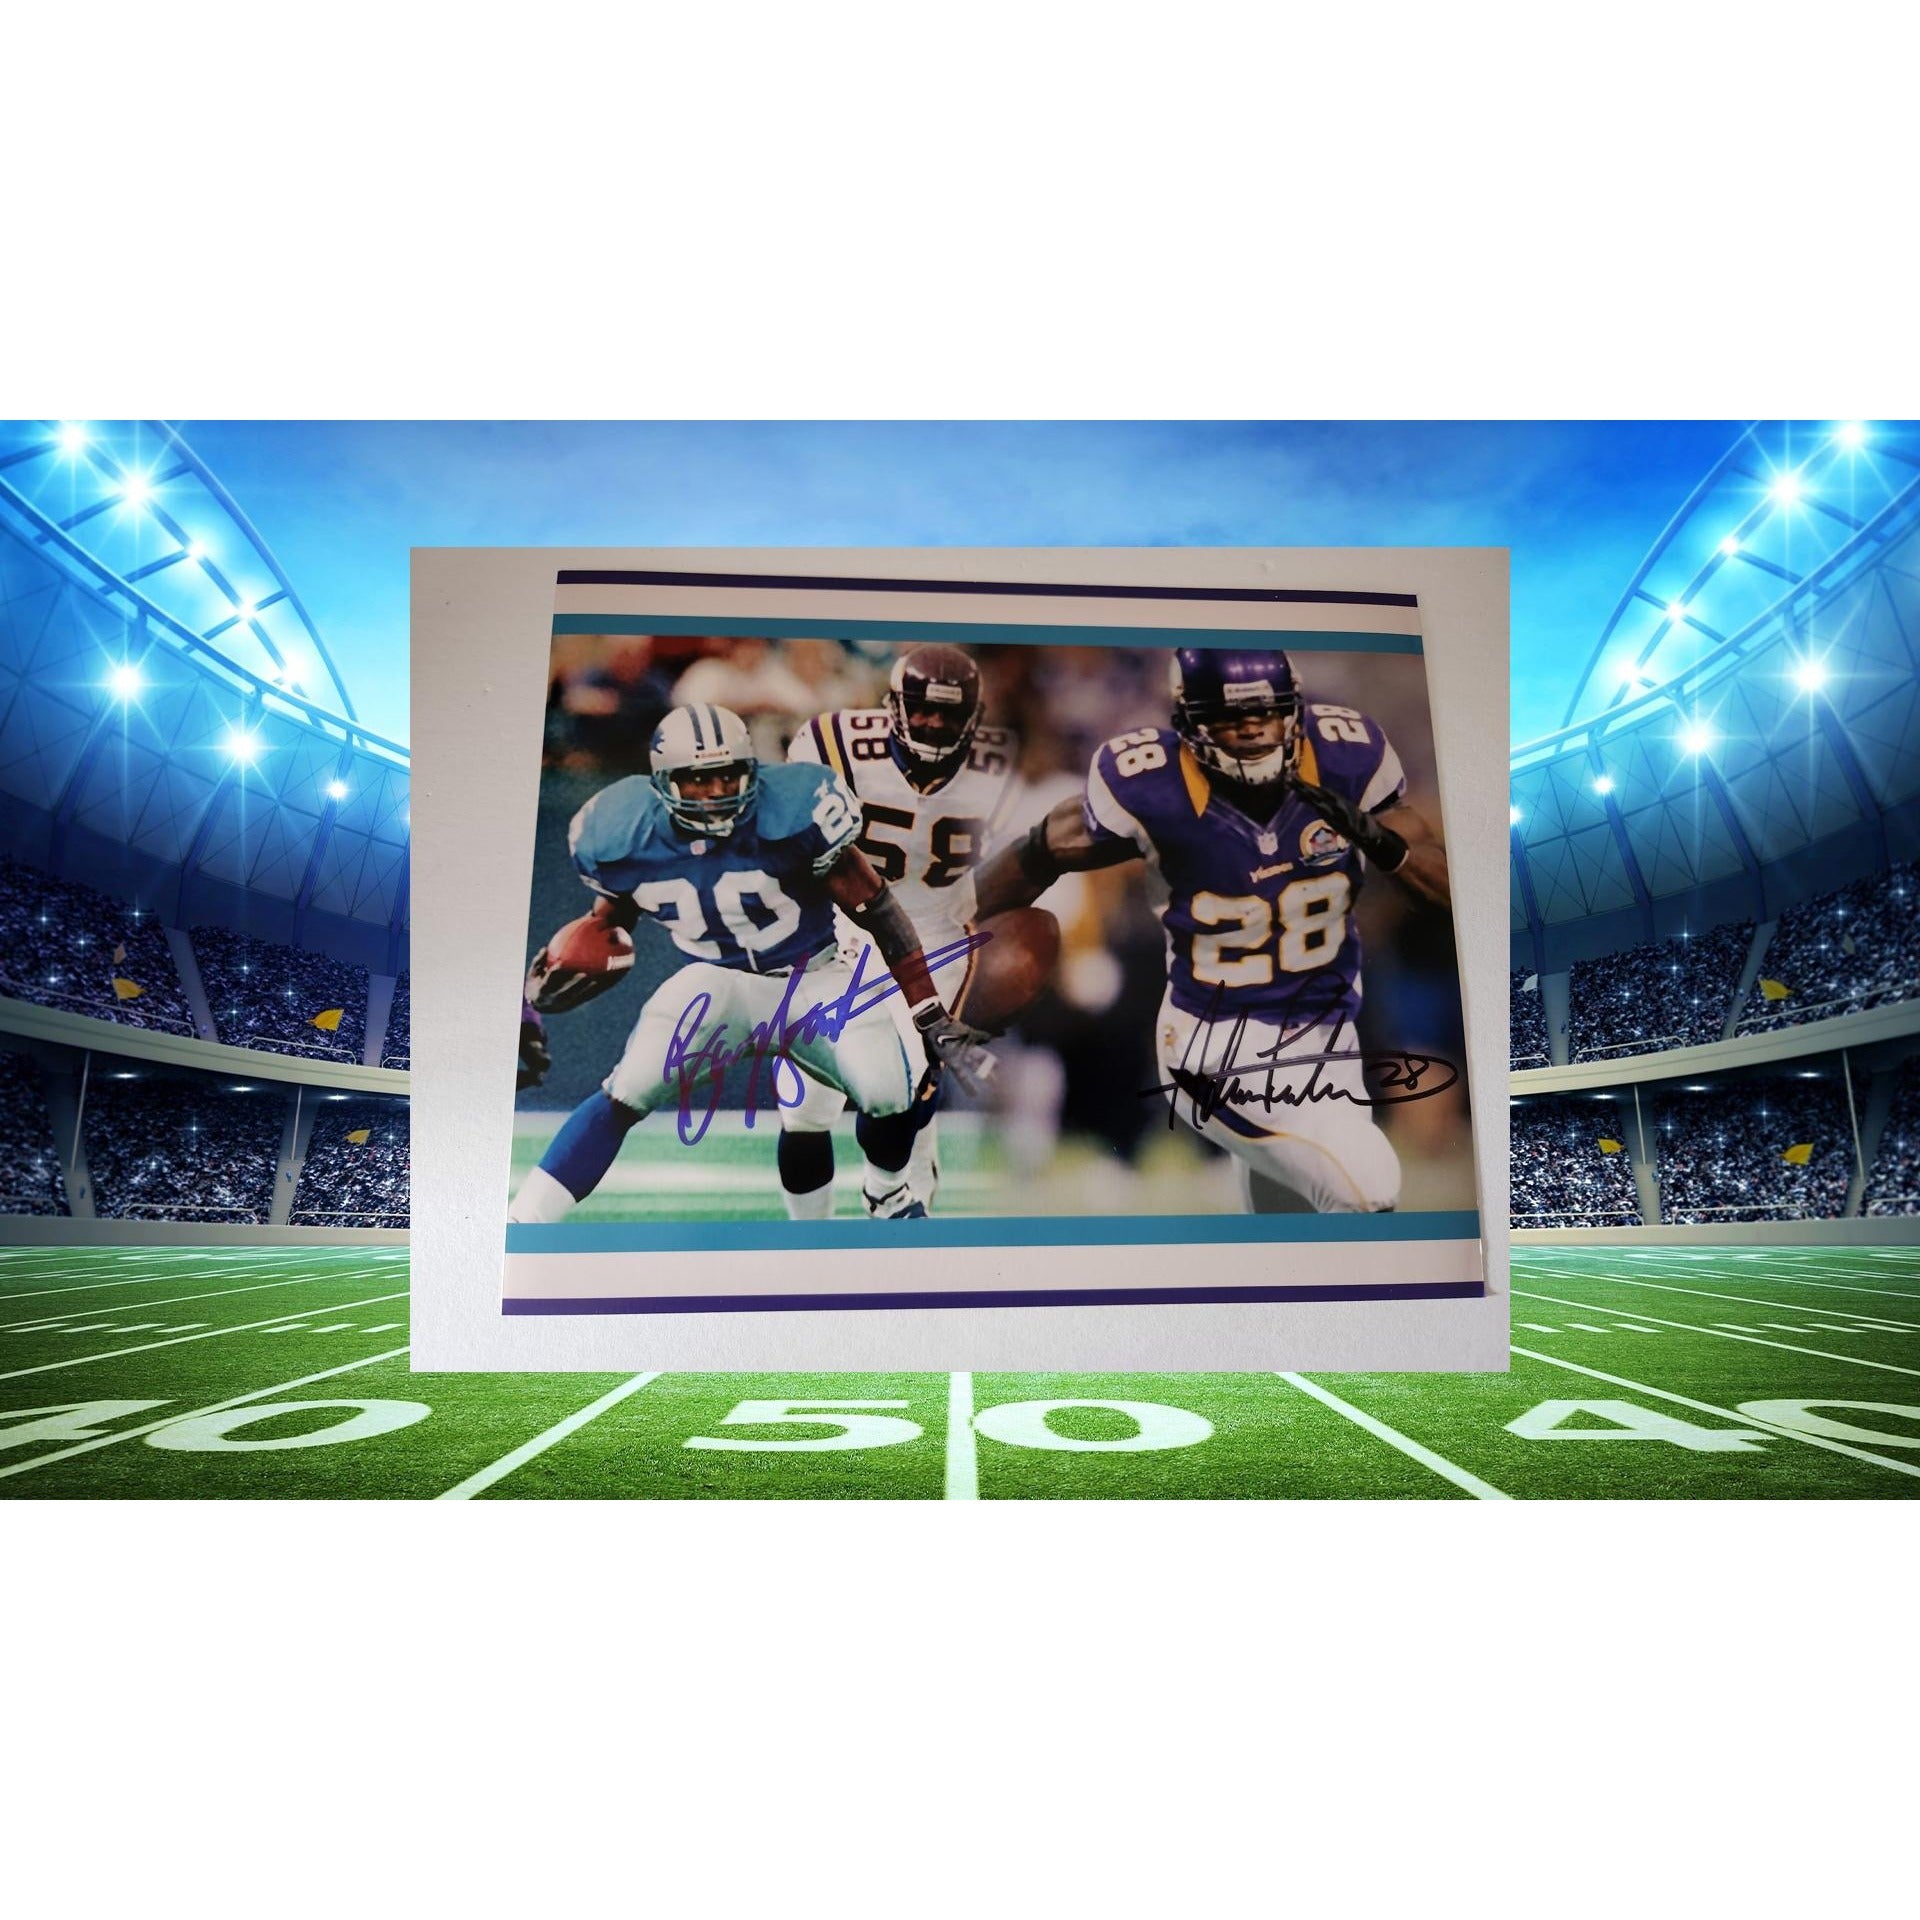 Barry Sanders and Adrian Peterson 8x10 photo signed